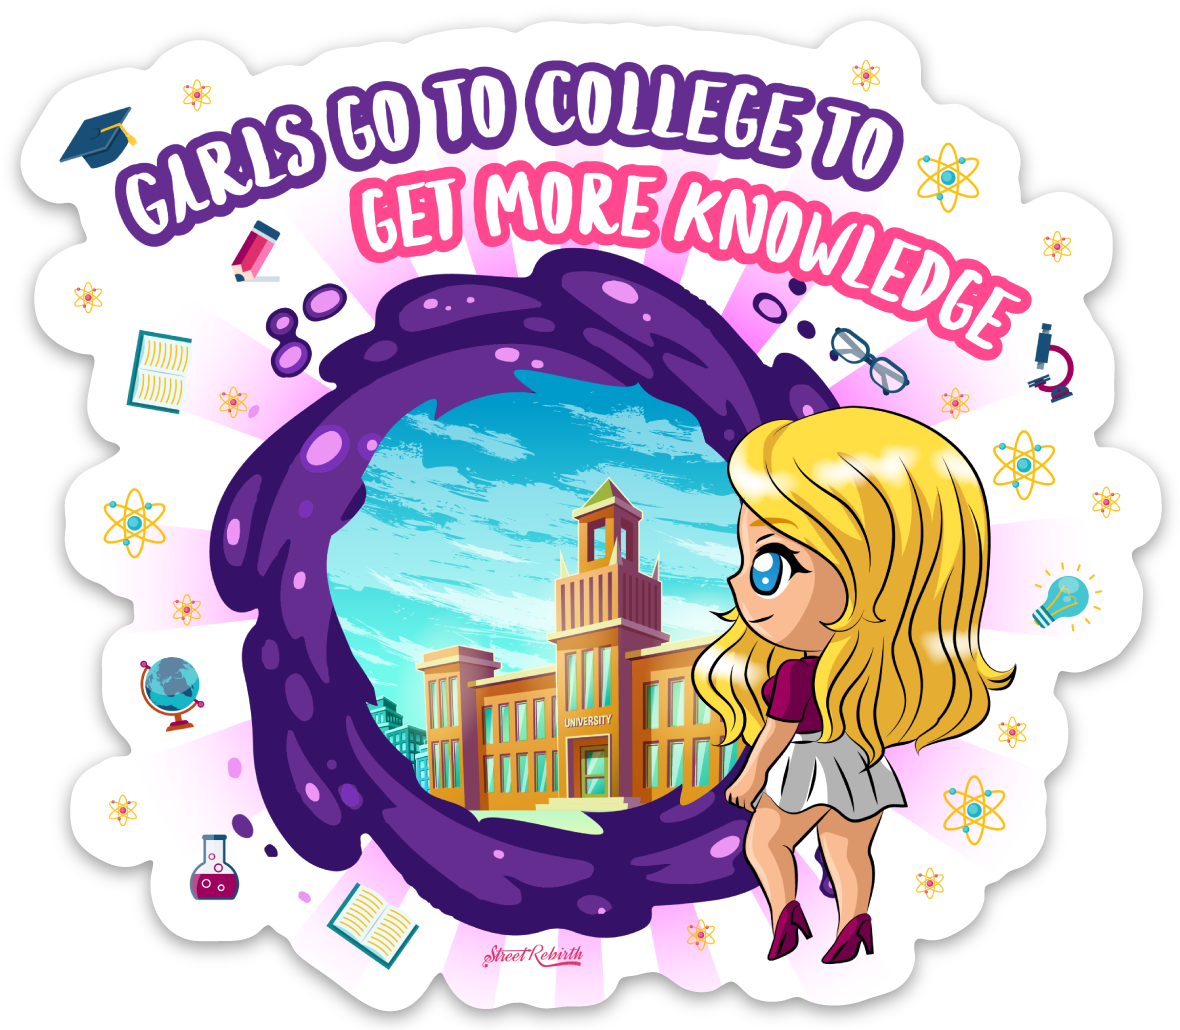 GARLS GO TO COLLEGE TO GET MORE KNOWLEDGE PUN STICKER – ONE 4 INCH WATER PROOF VINYL STICKER – FOR HYDRO FLASK, SKATEBOARD, LAPTOP, PLANNER, CAR, COLLECTING, GIFTING